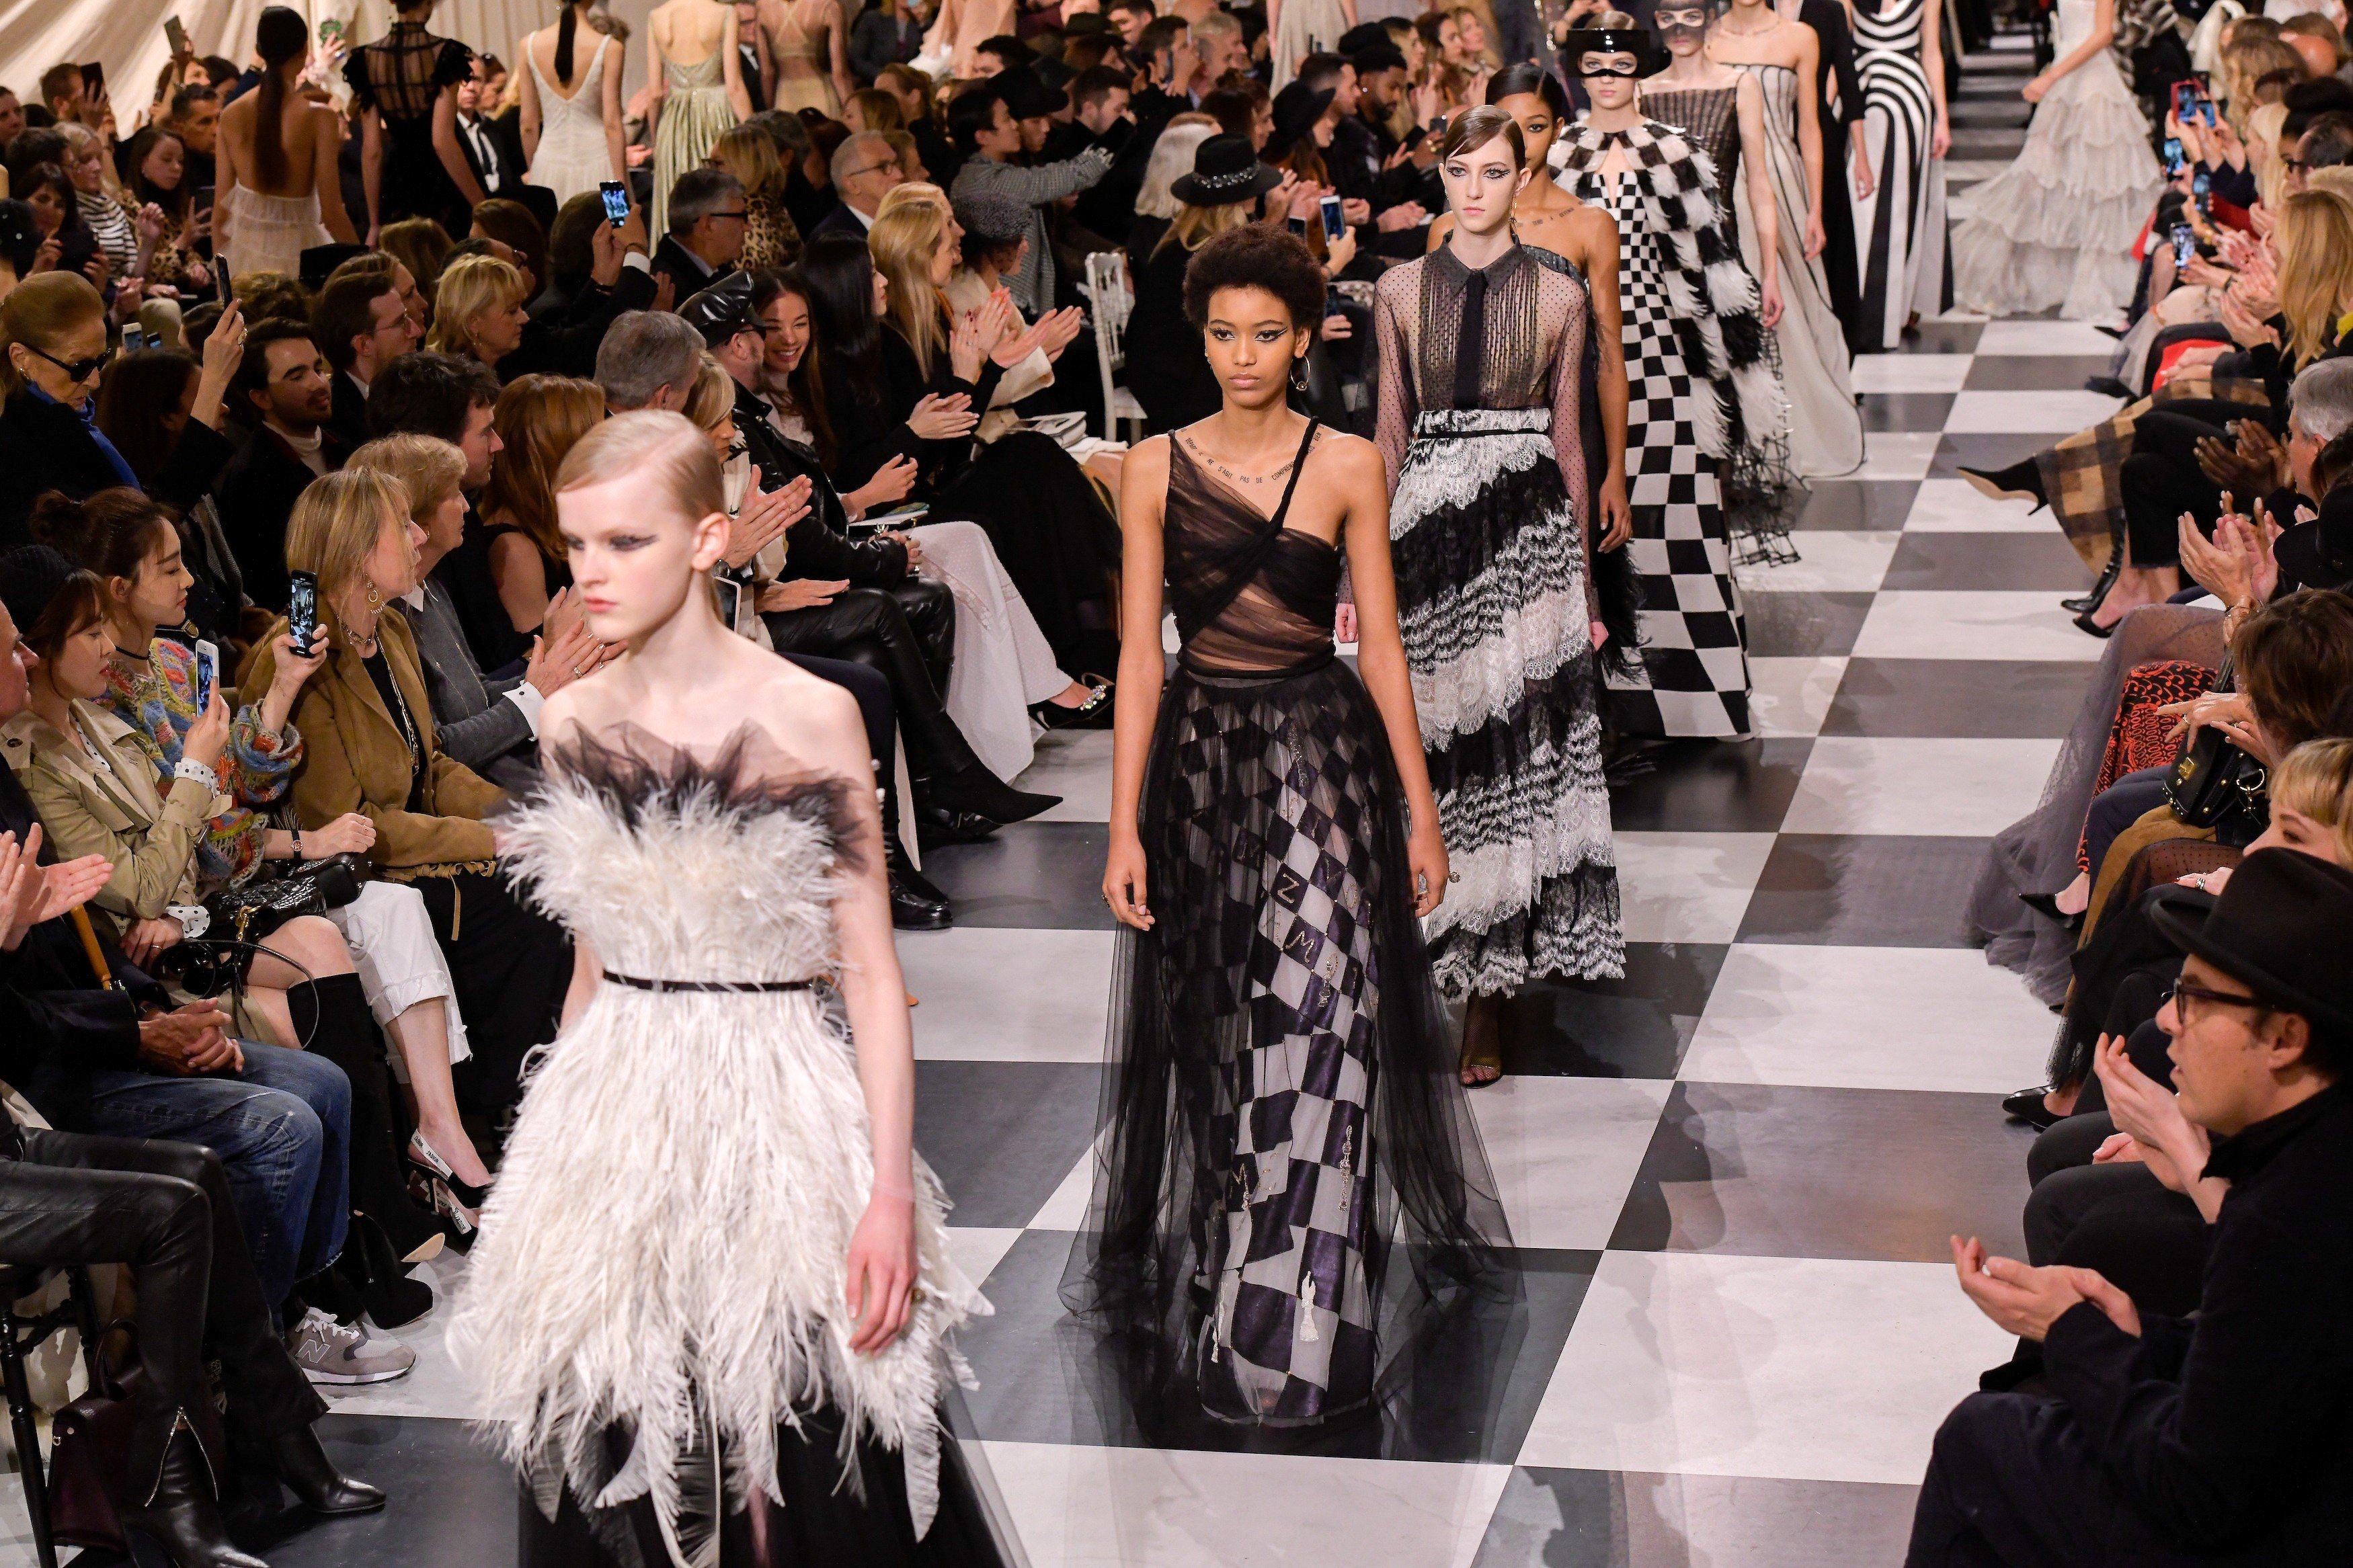 Christian Dior’s haute couture spring summer show takes place inside a huge cube covered in a checkered pattern